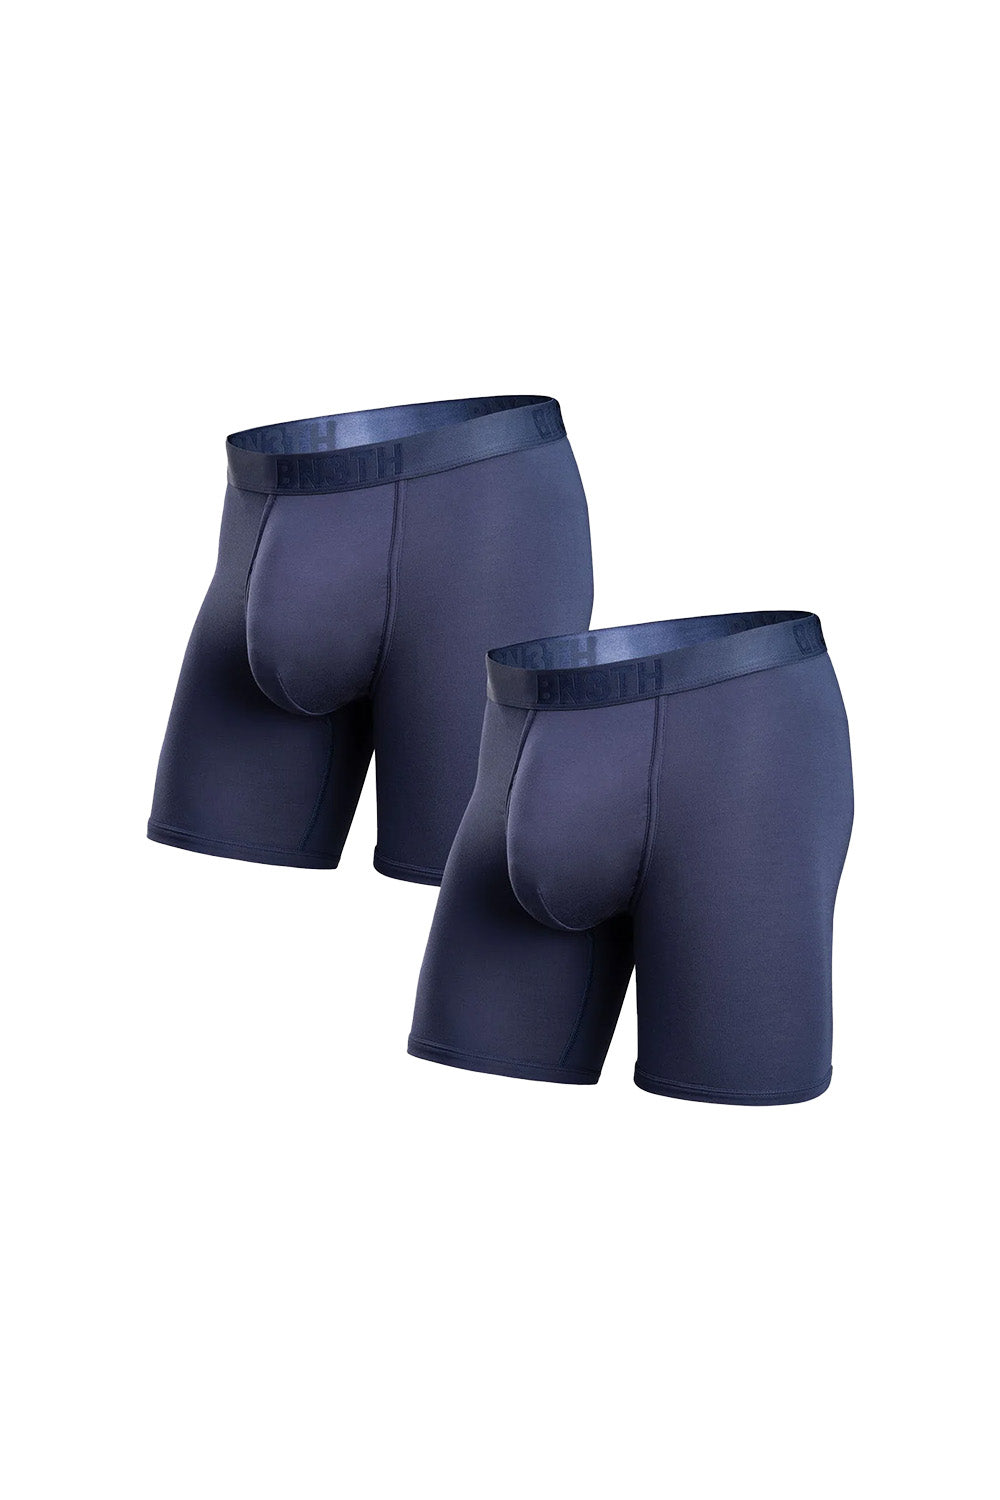 BN3TH - Classics Boxer Brief 2 Pack - Navy/Navy - Front